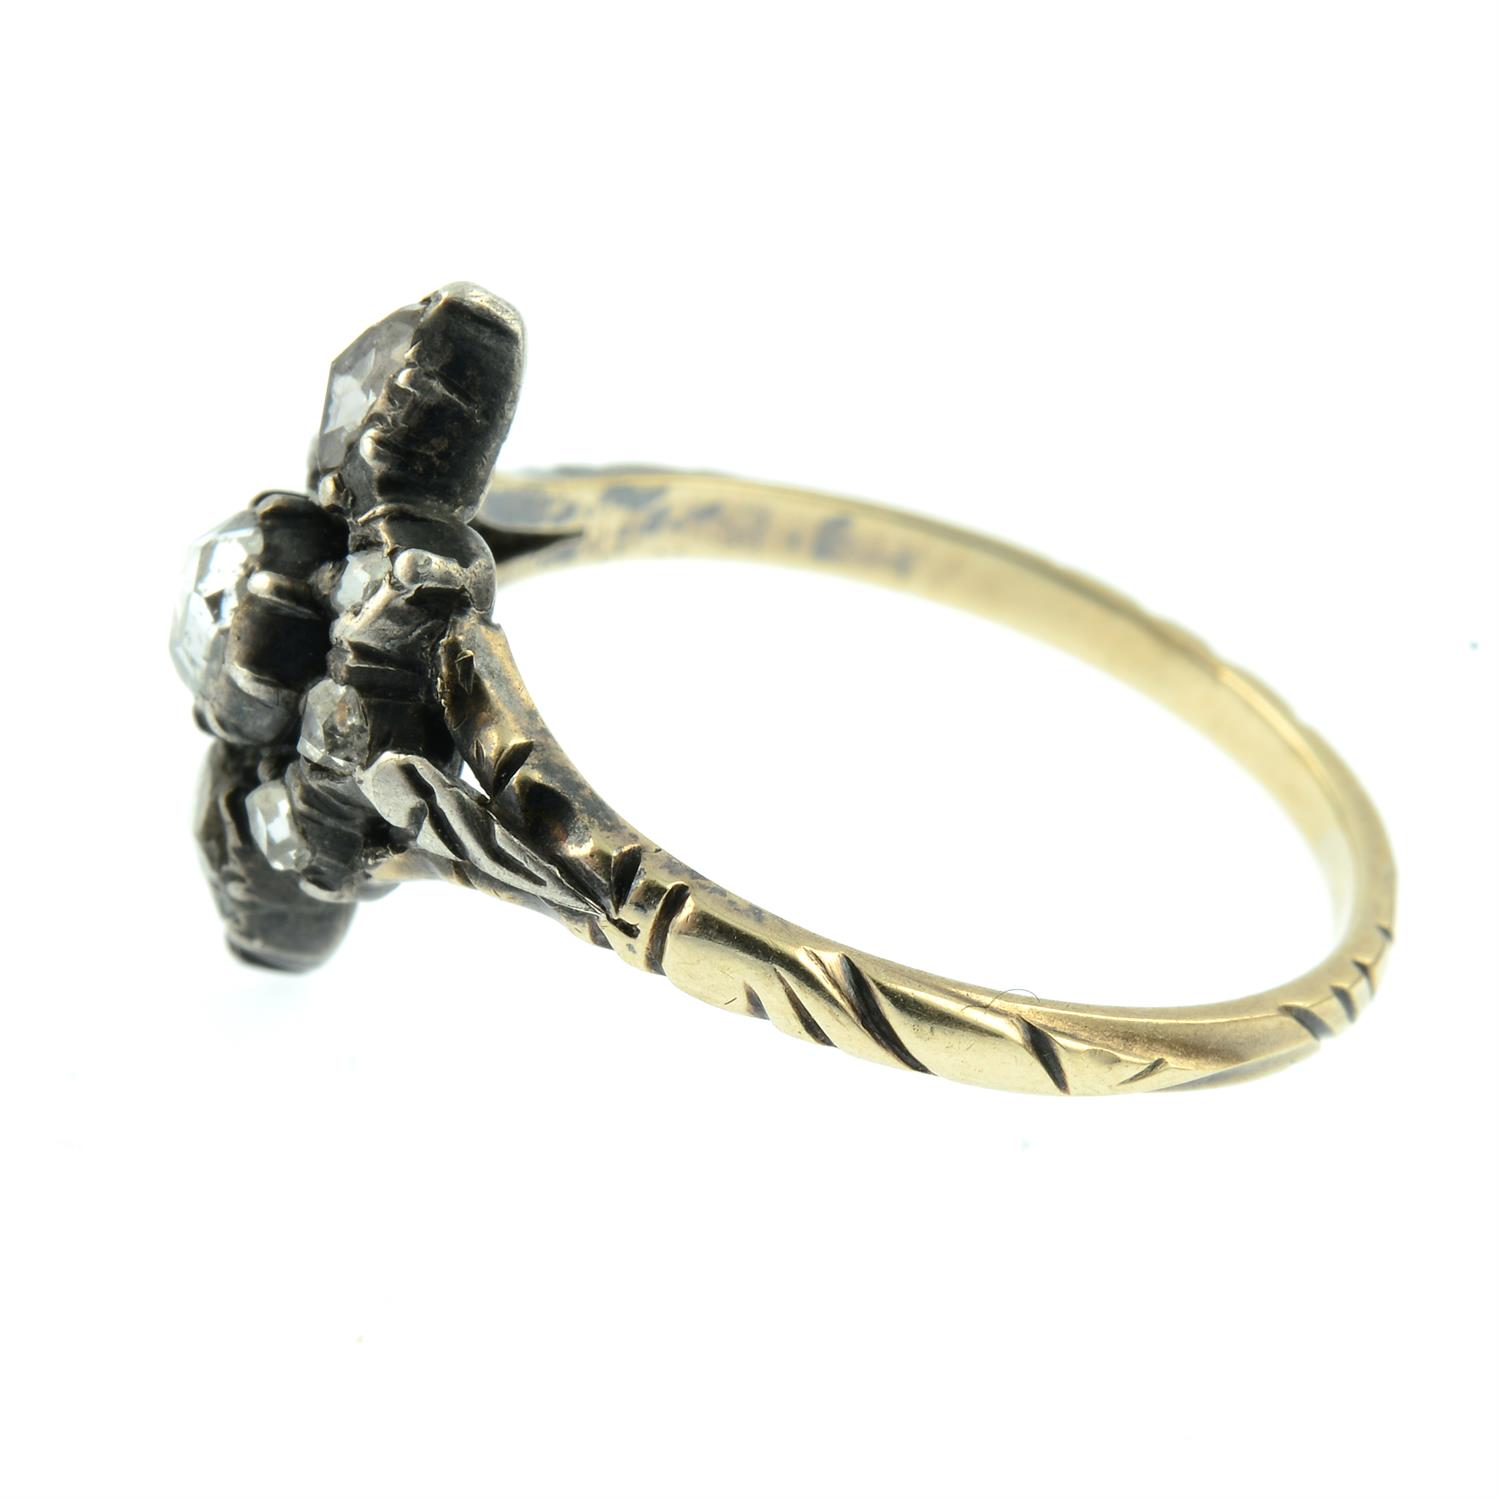 A 19th century silver and gold foil back rose-cut diamond cluster ring. - Image 3 of 5